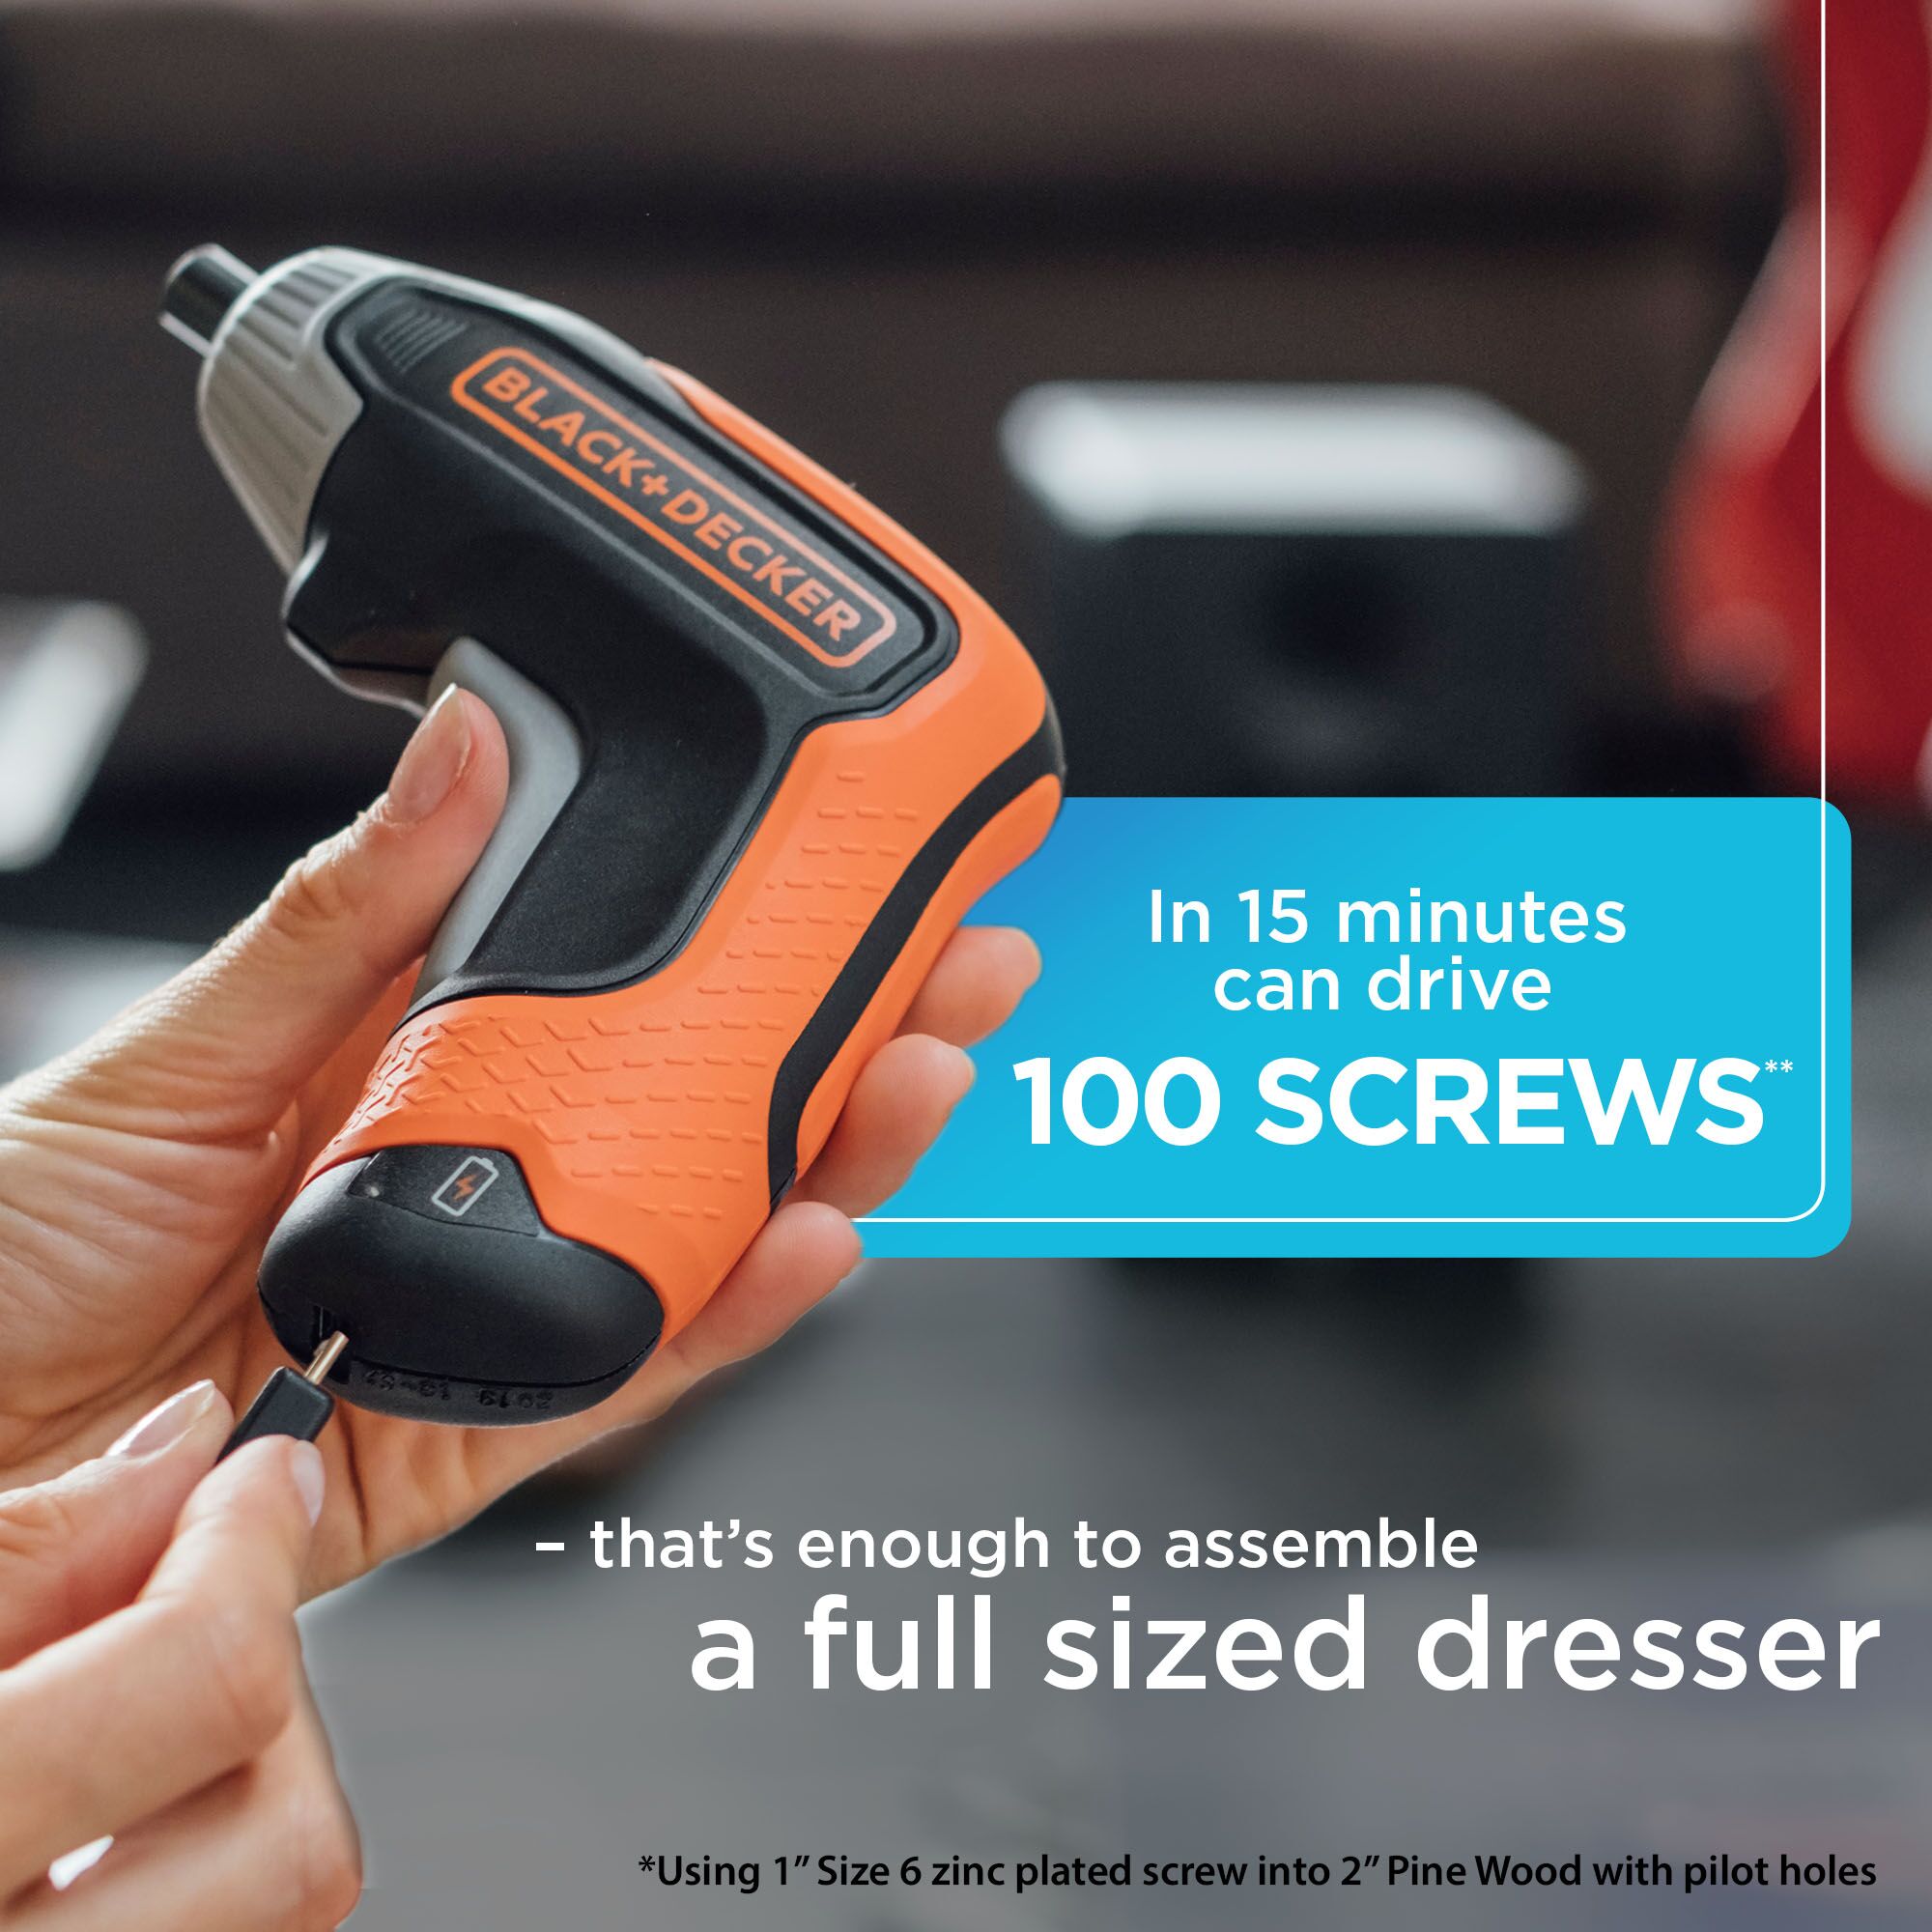 The BLACK+DECKER 4V Max Cordless Screwdriver can drive 100 screws in 15 minutes